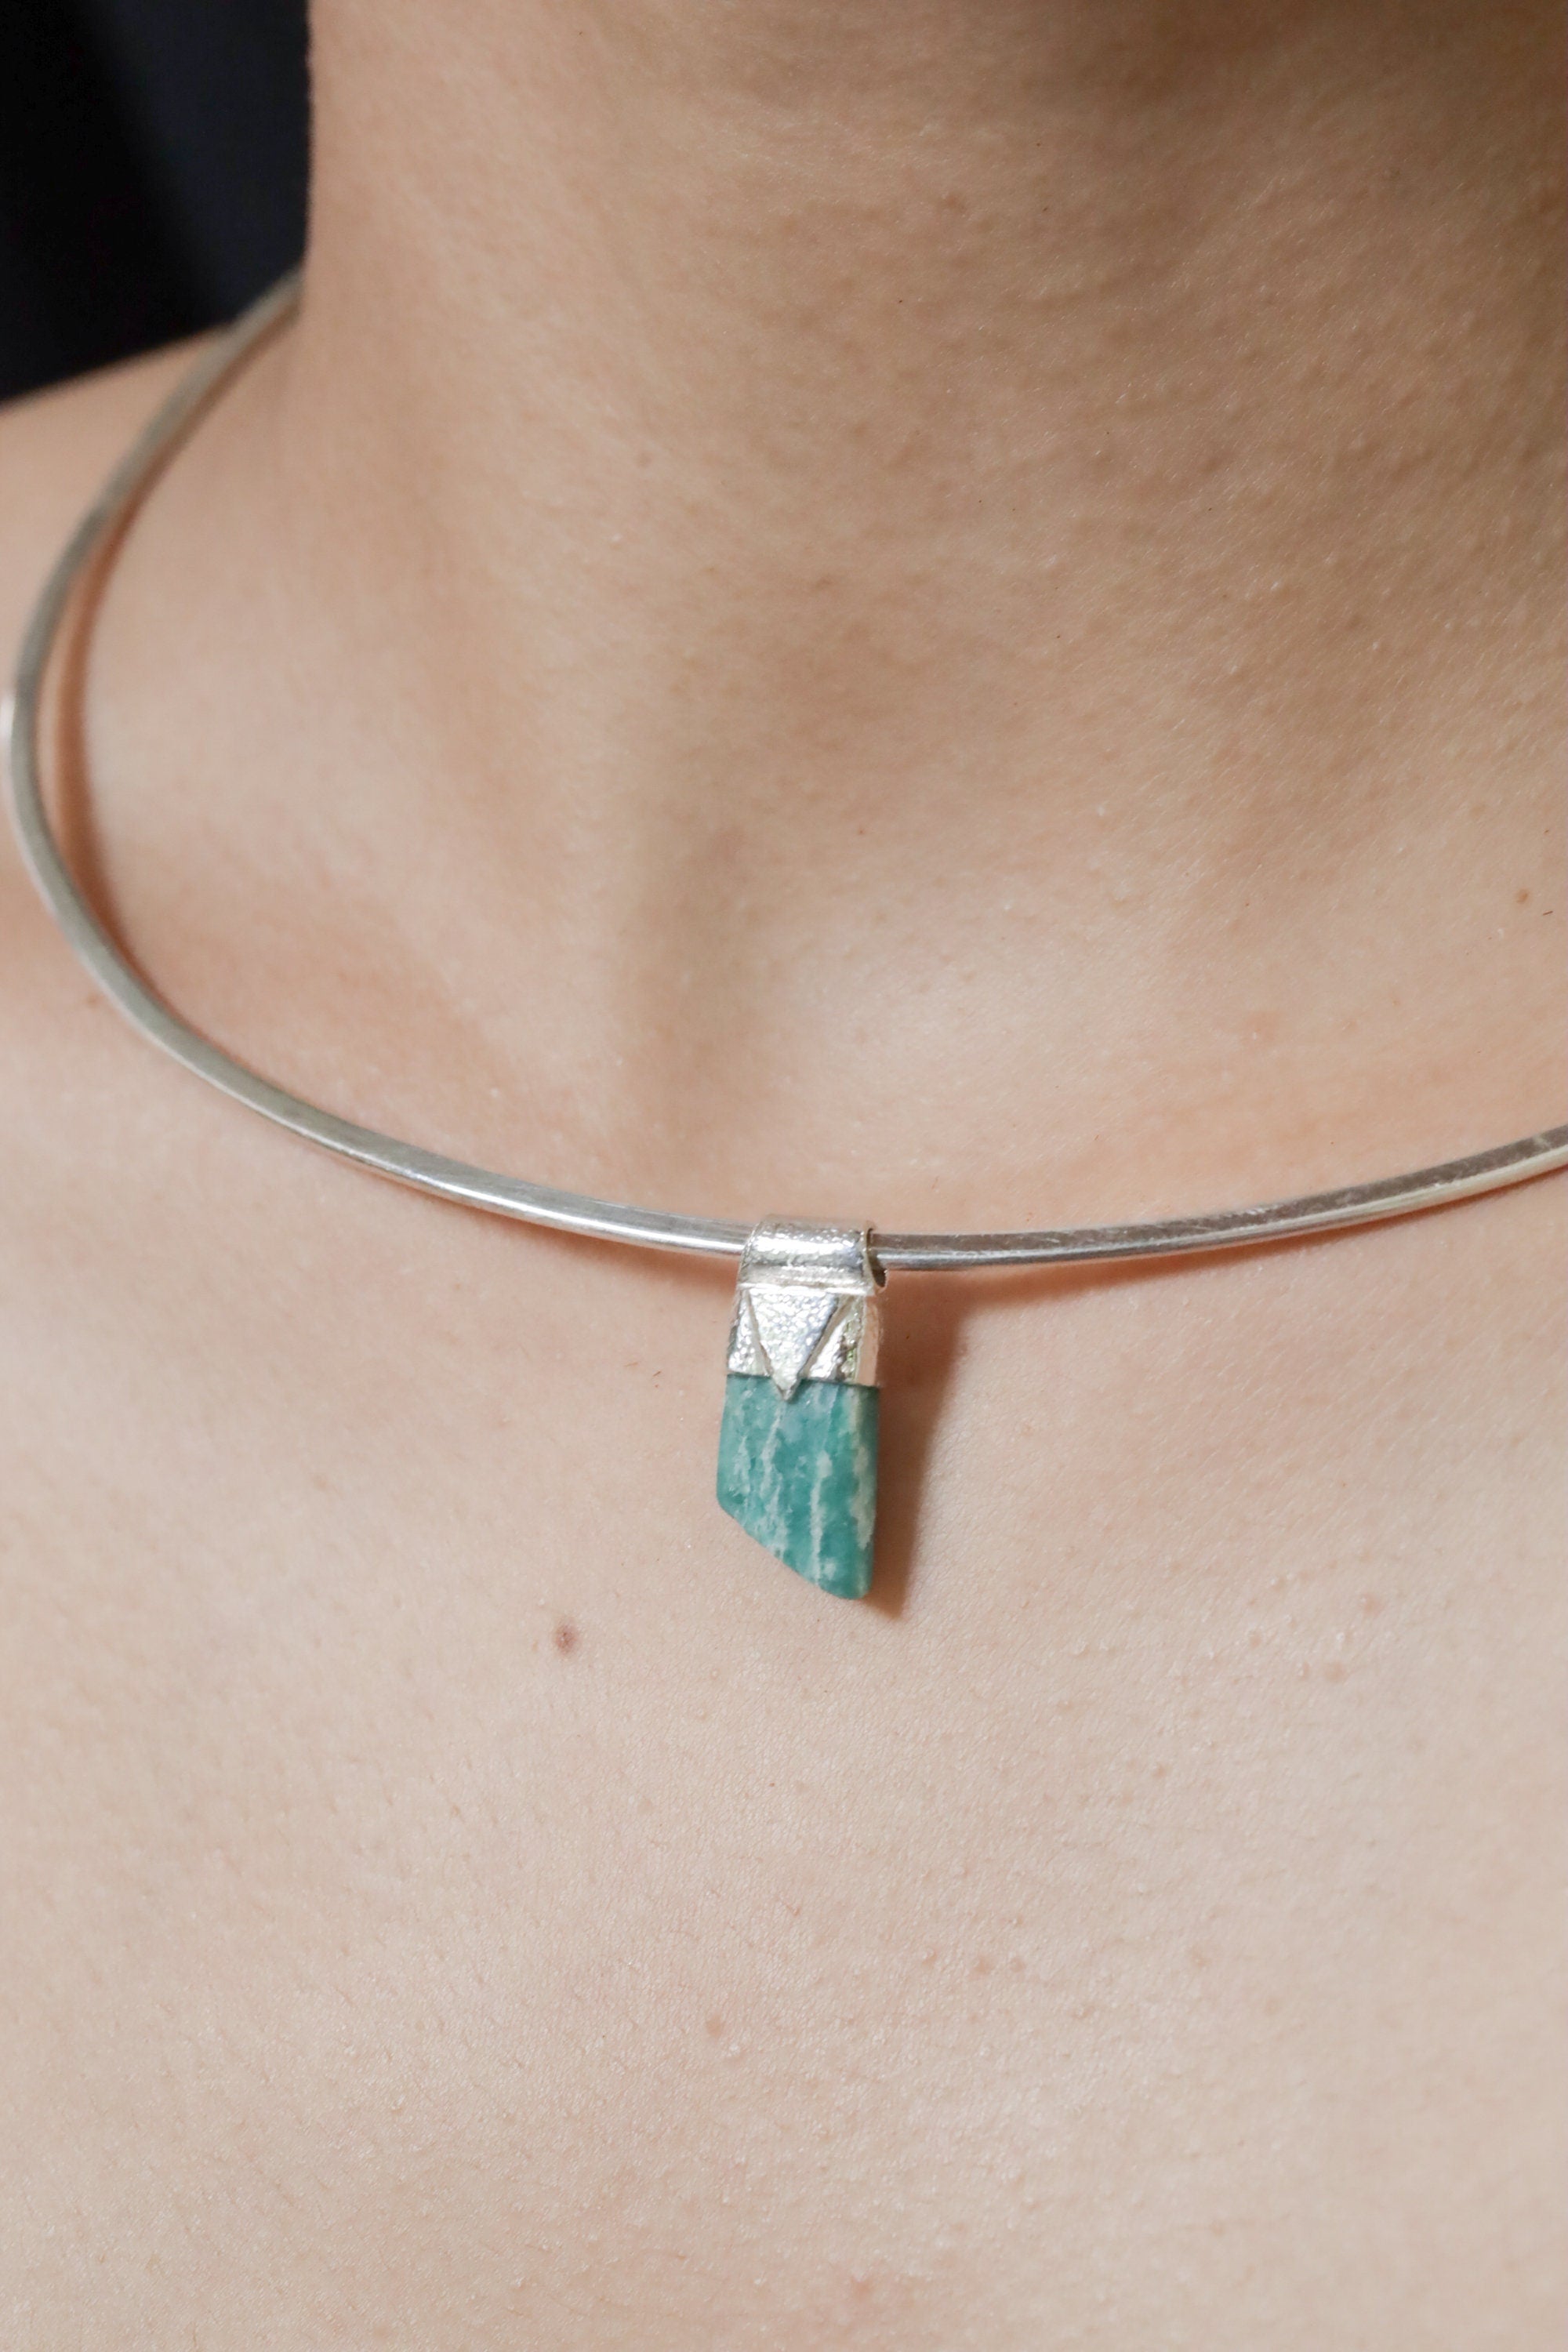 Rough Cut Amazonite - Stack Pendant - Organic Textured 925 Sterling Silver - Crystal Necklace - No/1